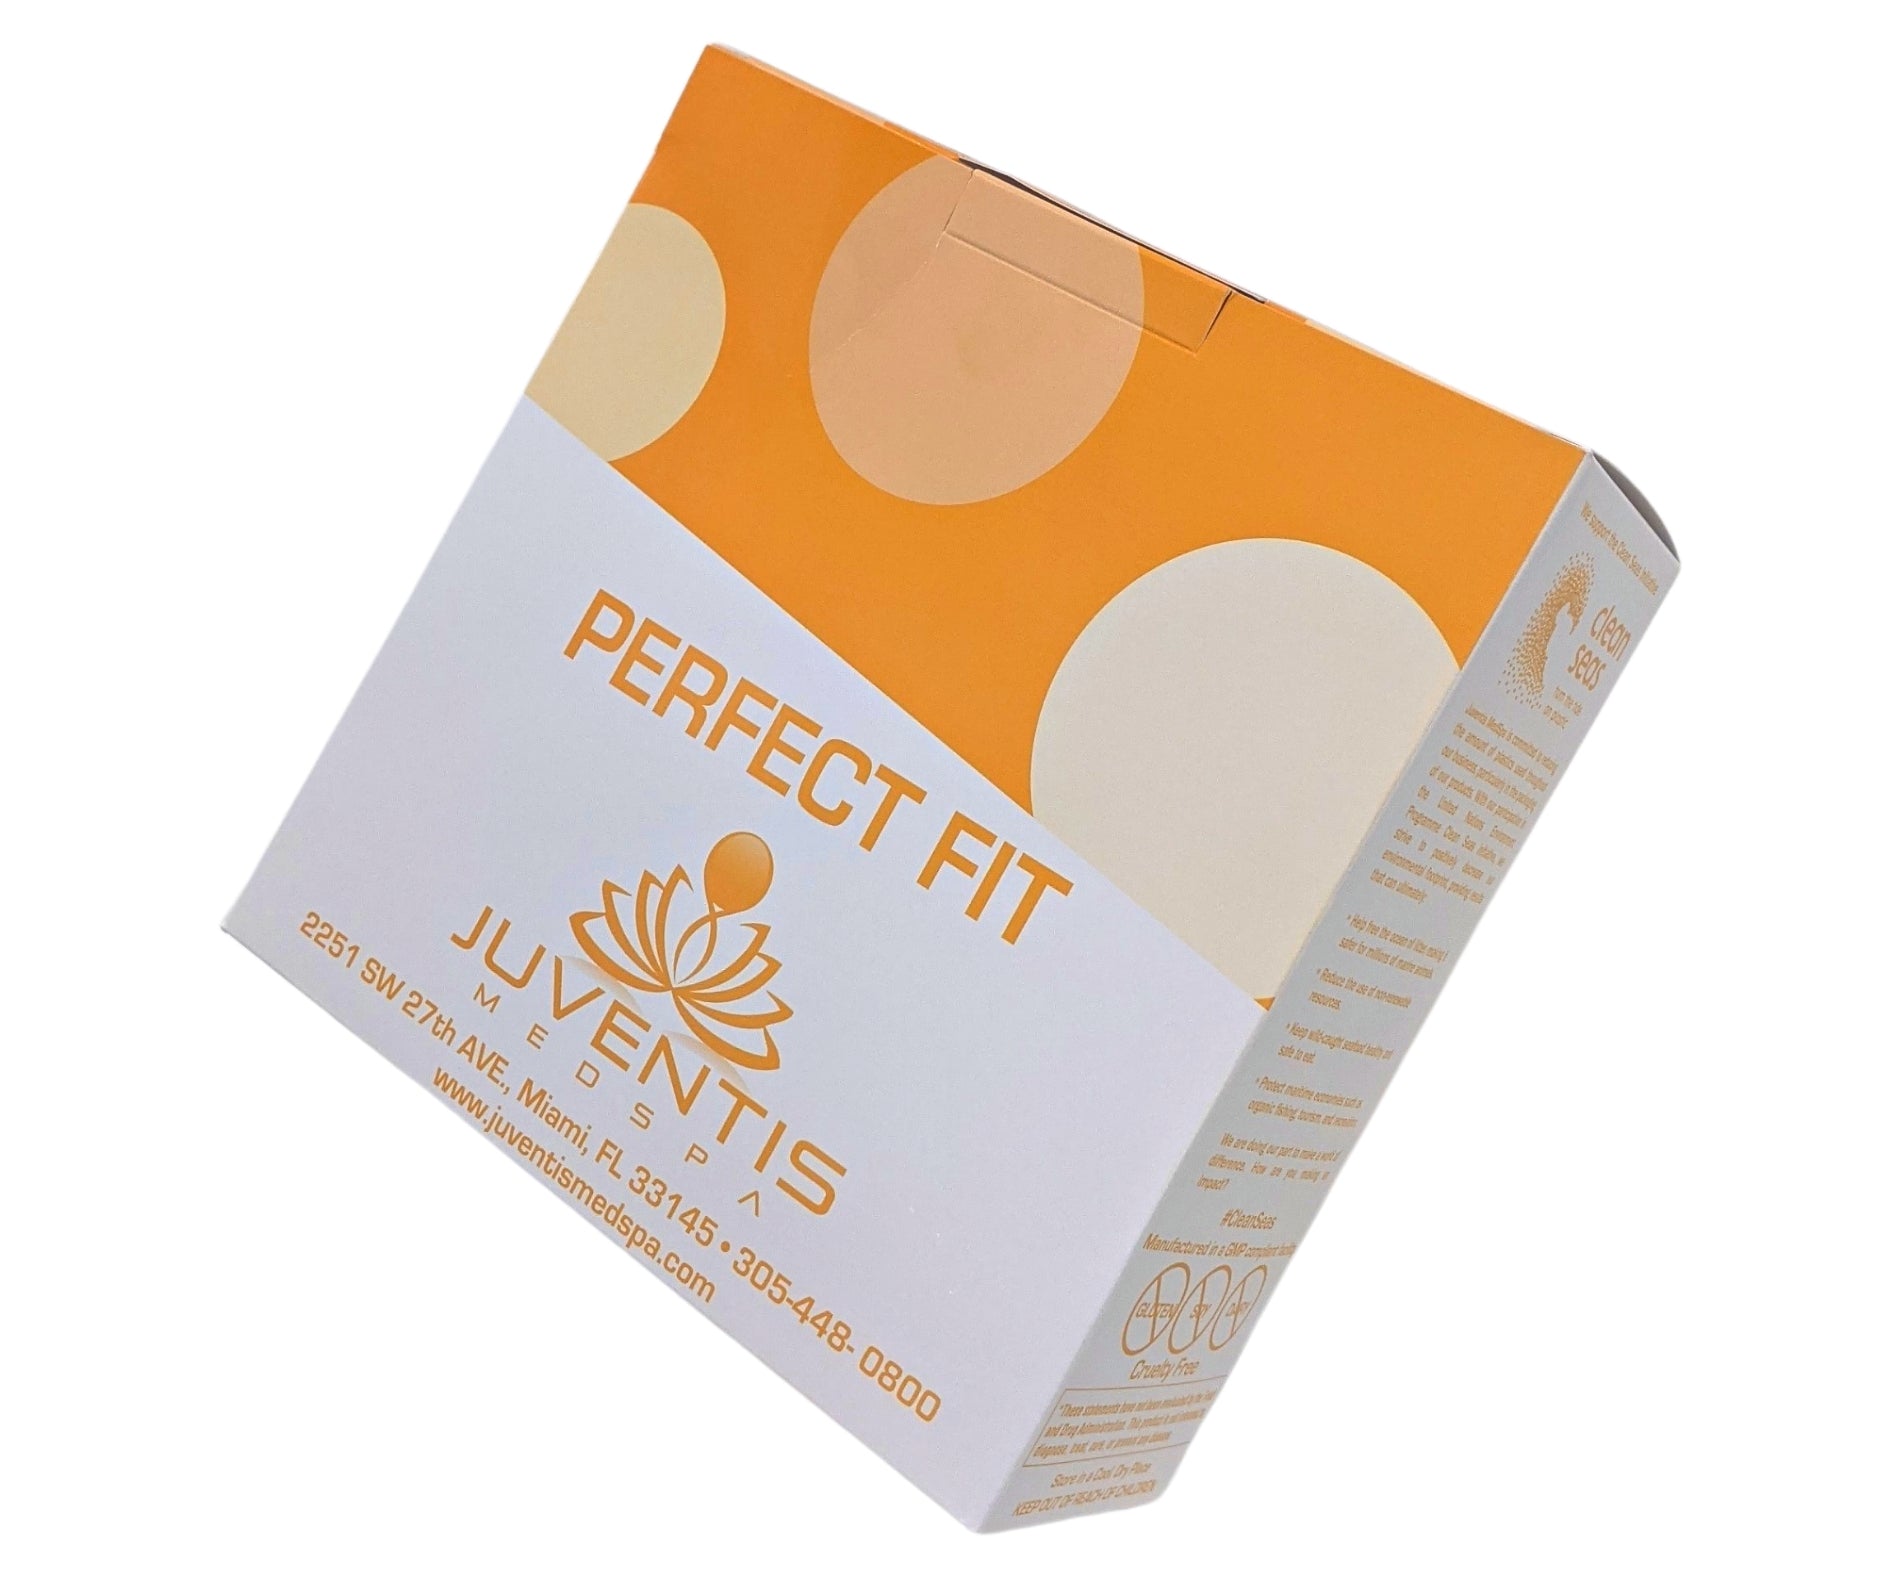 Perfect Fit is a combination of 3 key supplements and aids in maintaining weight loss, reducing appetite, improving metabolism, and stimulating fat loss. These 3 powerful supplements synergize together to burn fat and help get you towards your ideal weight. What are you waiting for? It’s the perfect fit for you! 